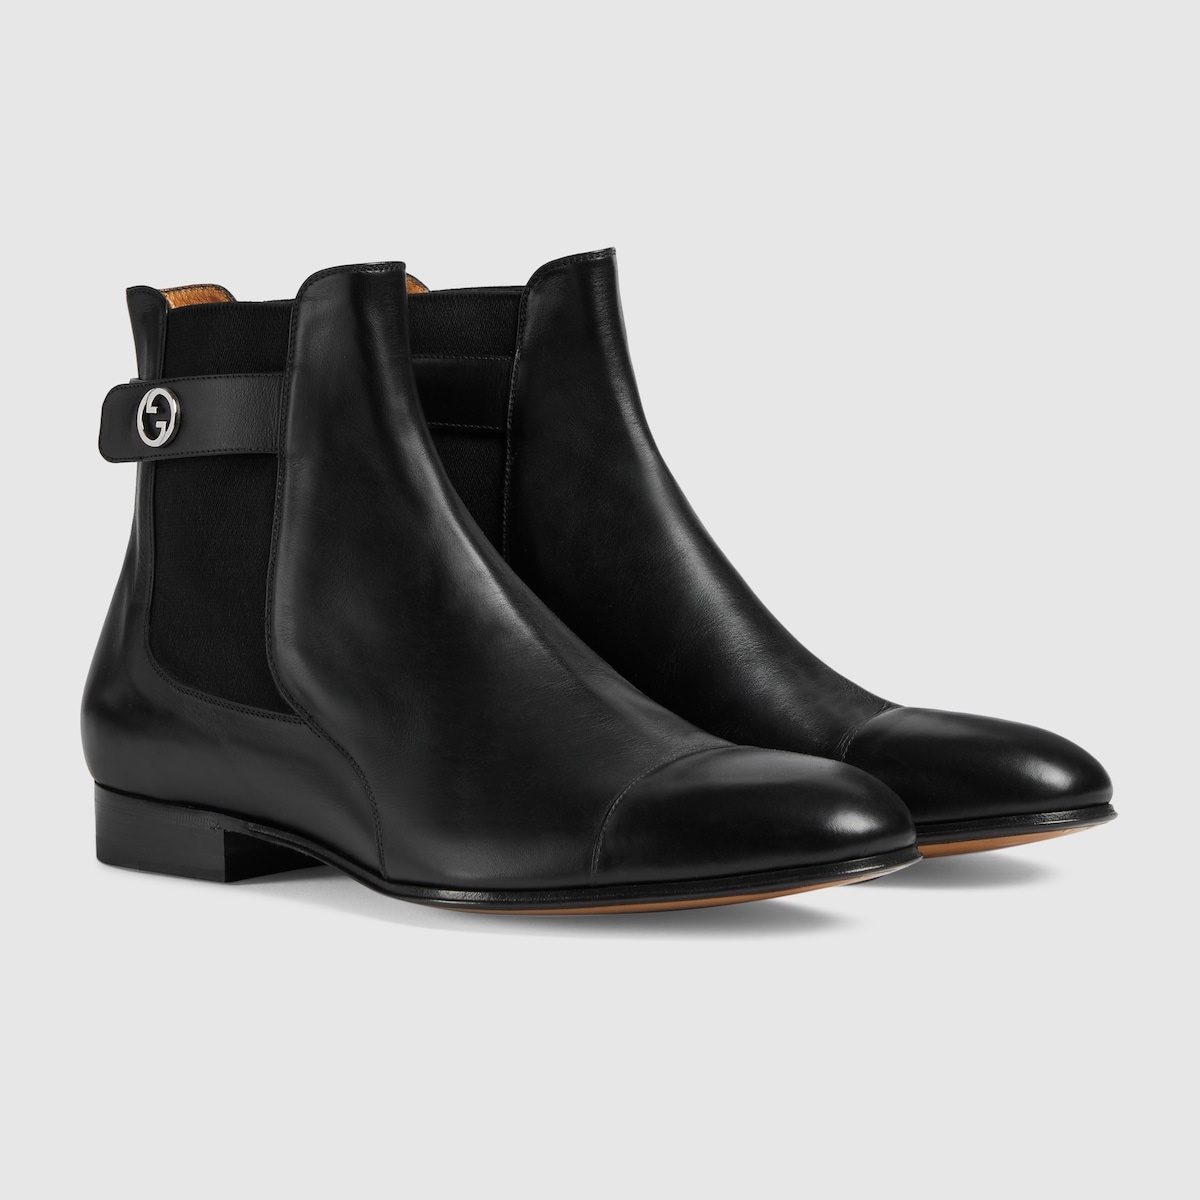 Men's Gucci Blondie ankle boot - 2